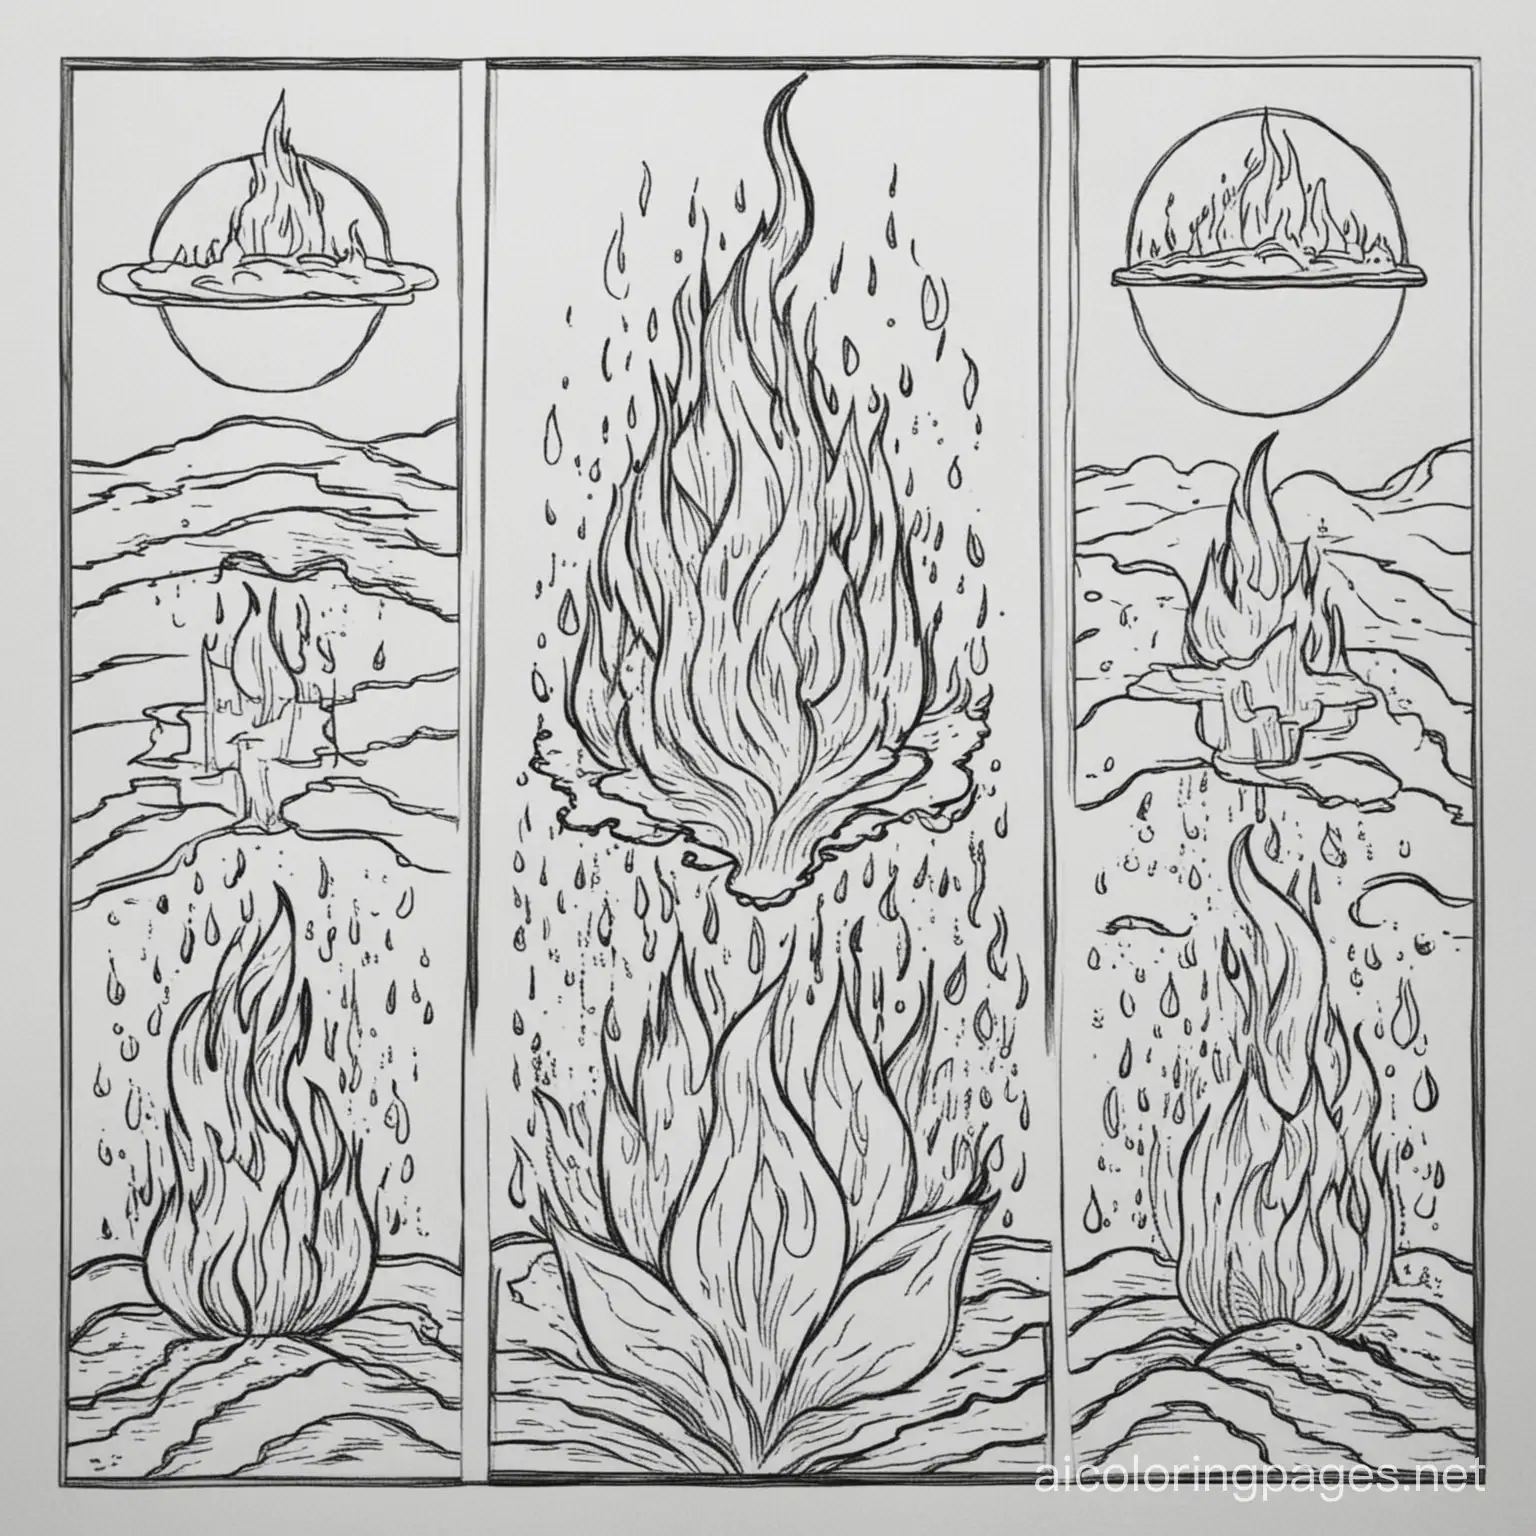 fire water air earth and  coloring pages, Coloring Page, black and white, line art, white background, Simplicity, Ample White Space. The background of the coloring page is plain white to make it easy for young children to color within the lines. The outlines of all the subjects are easy to distinguish, making it simple for kids to color without too much difficulty